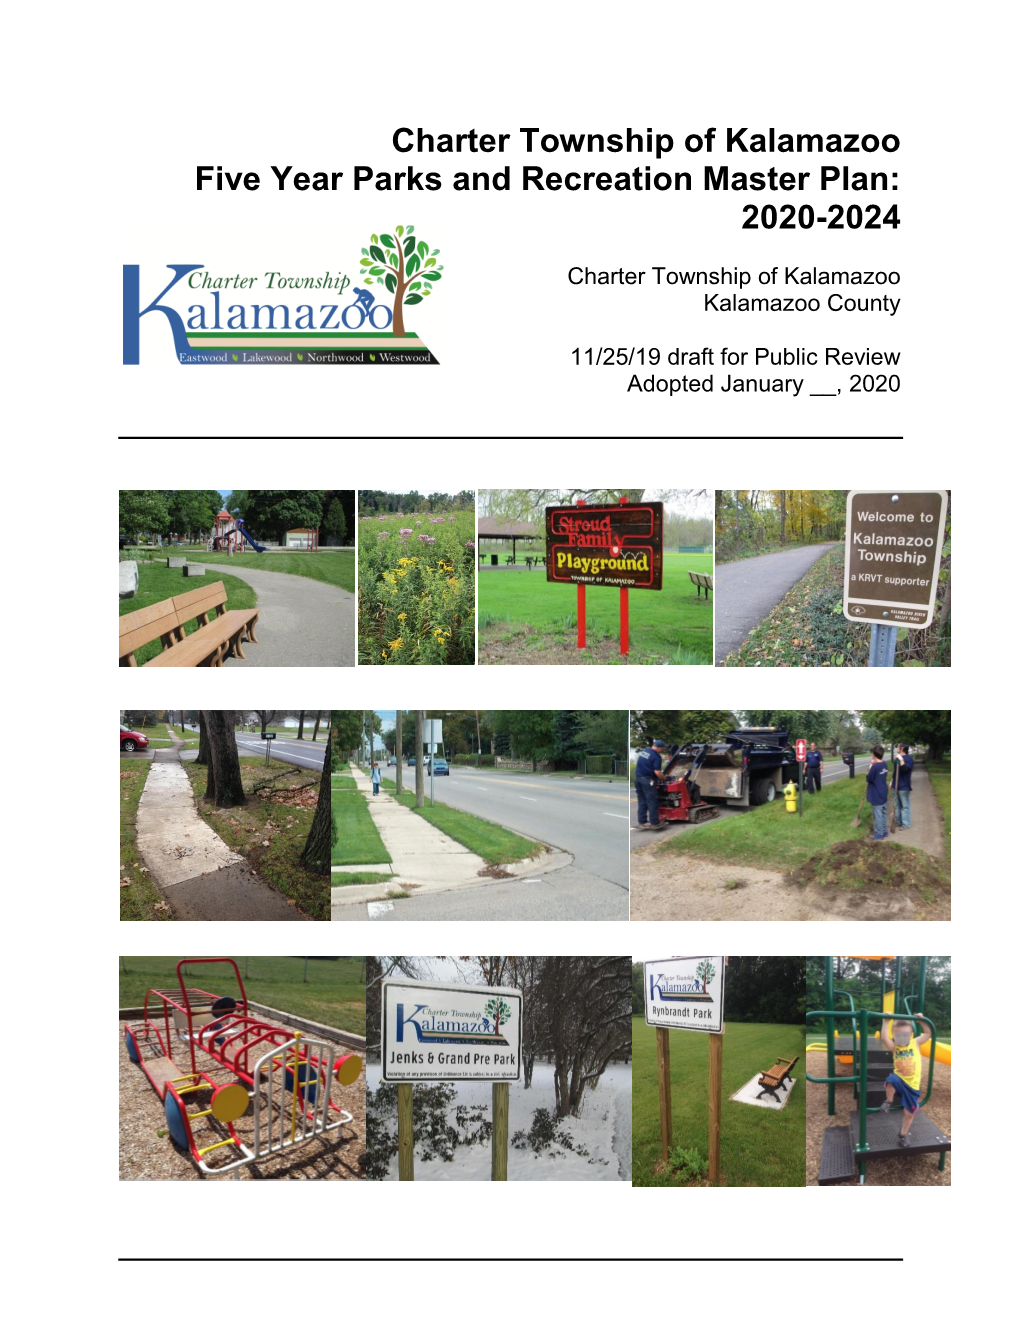 Charter Township of Kalamazoo Five Year Parks and Recreation Master Plan: 2020-2024